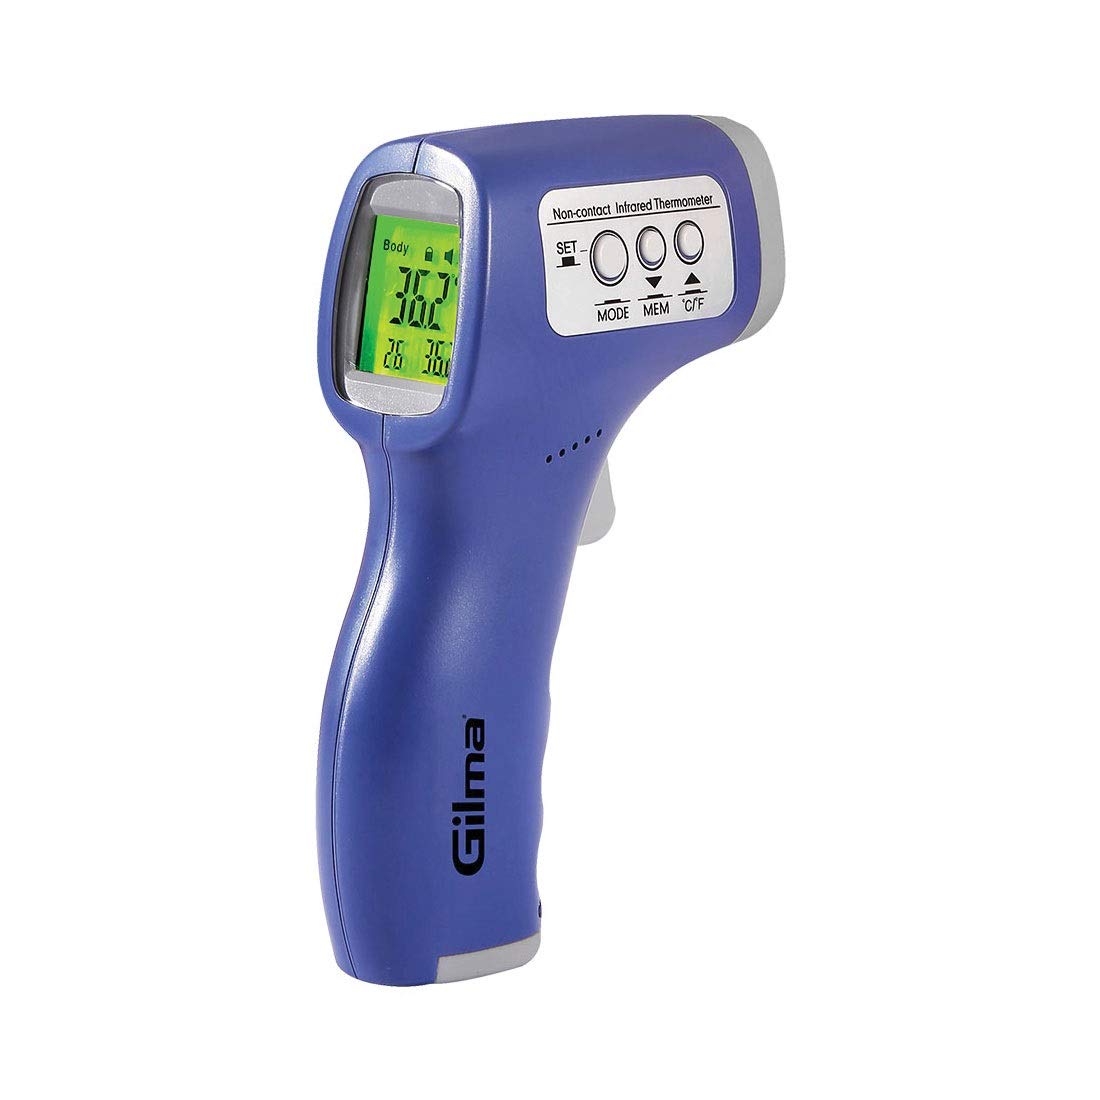 Gilma Infrared Thermometer Non-Contact Digital Forehead Temperature Gun - 1  Unit (MADE IN INDIA) - Hungamastart